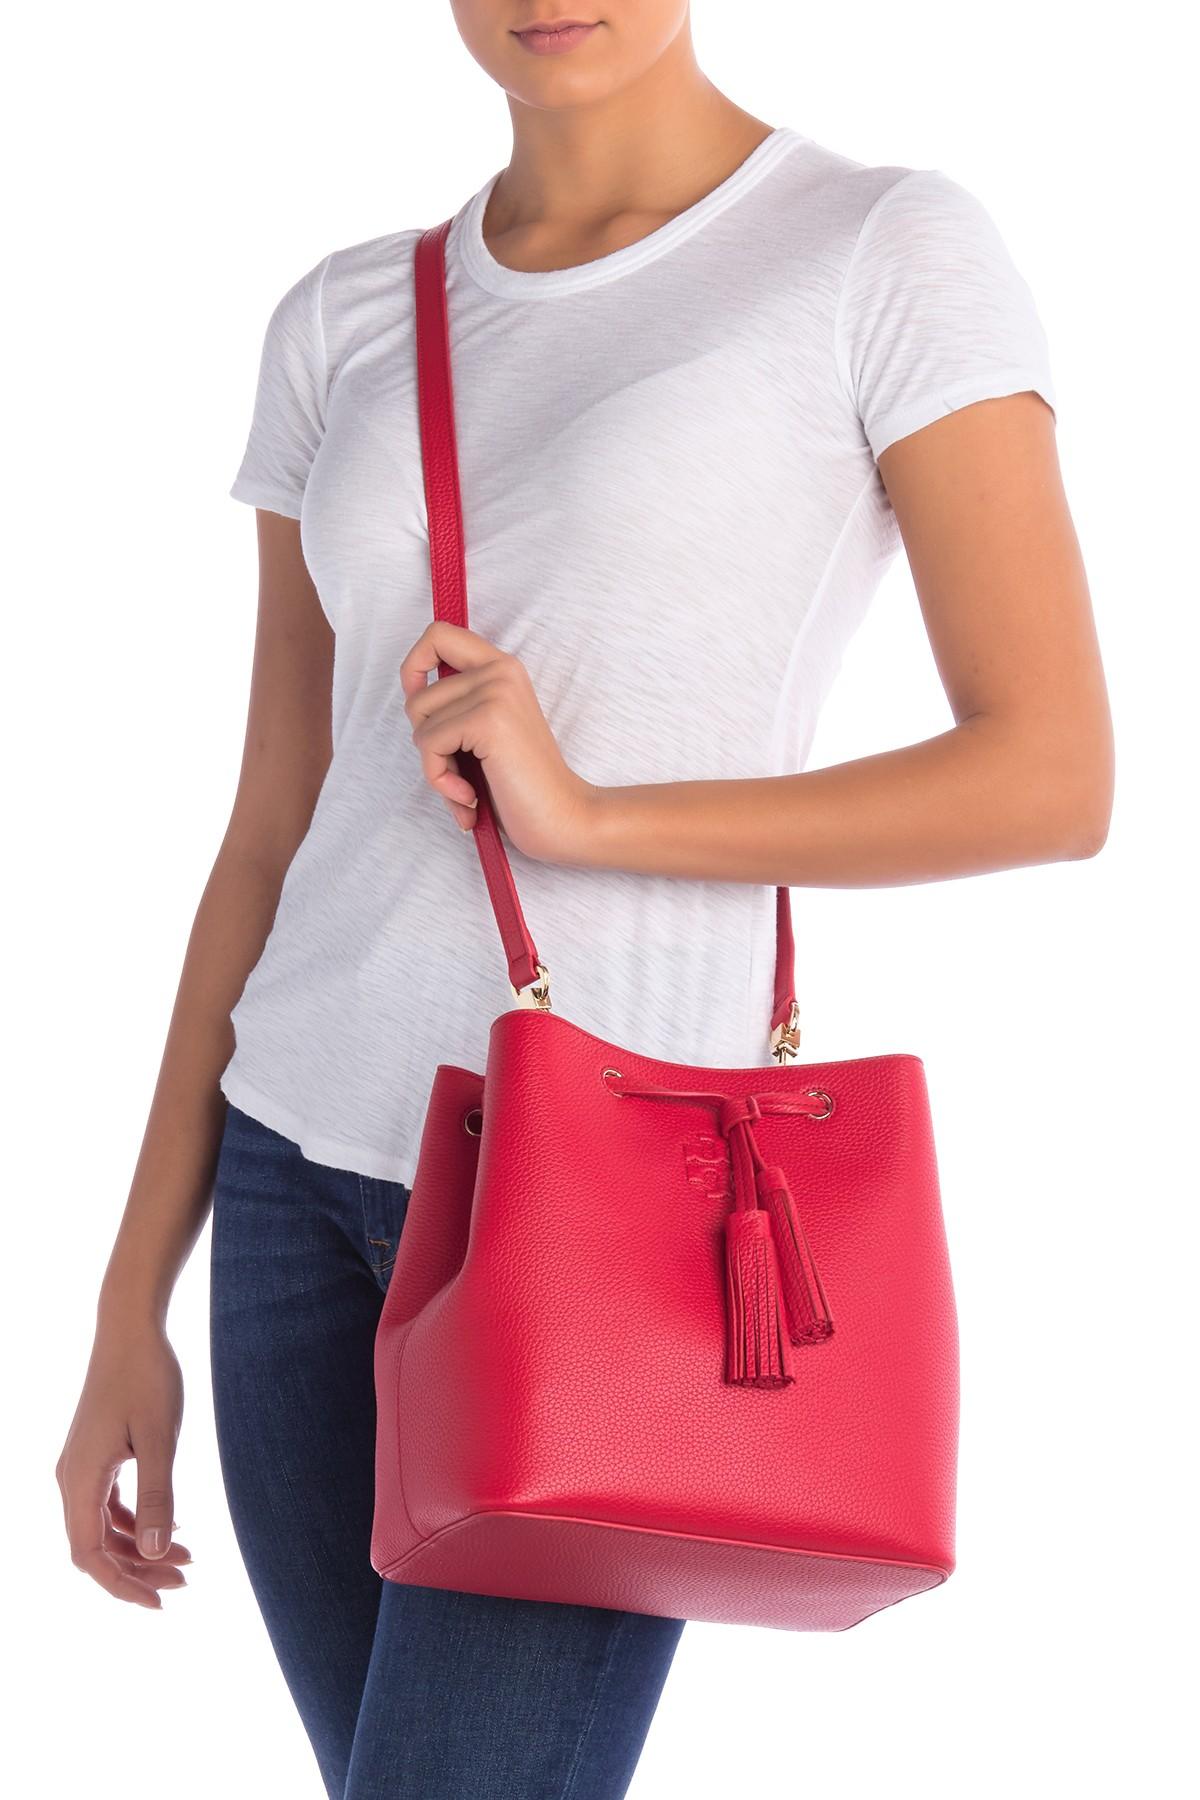 Tory Burch Thea Bucket Bag in Red